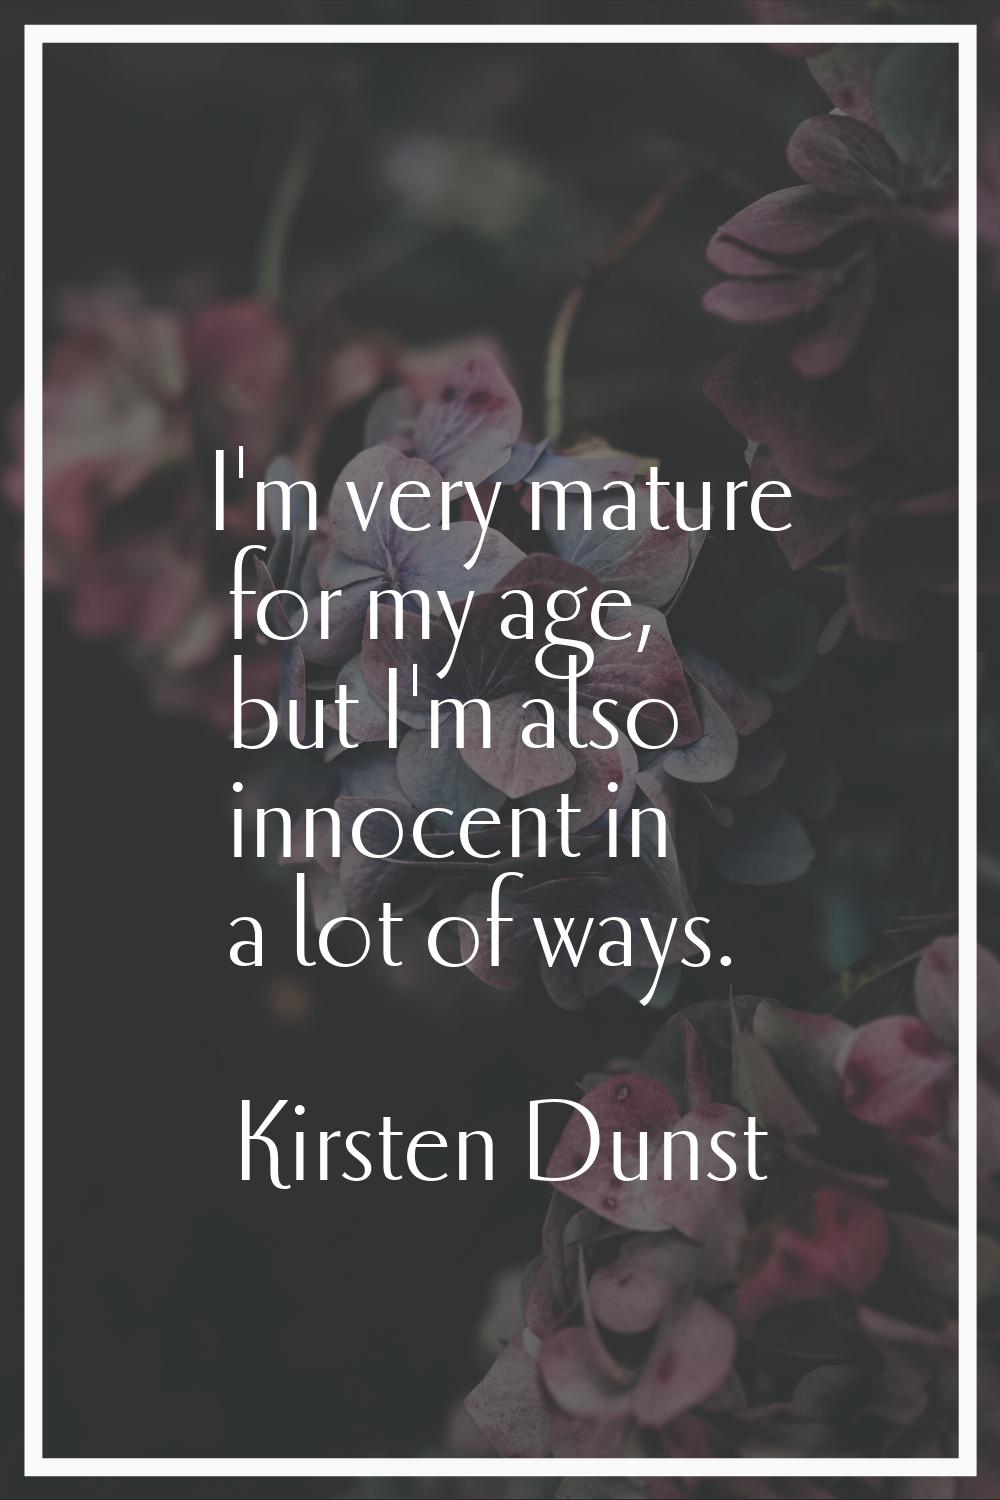 I'm very mature for my age, but I'm also innocent in a lot of ways.